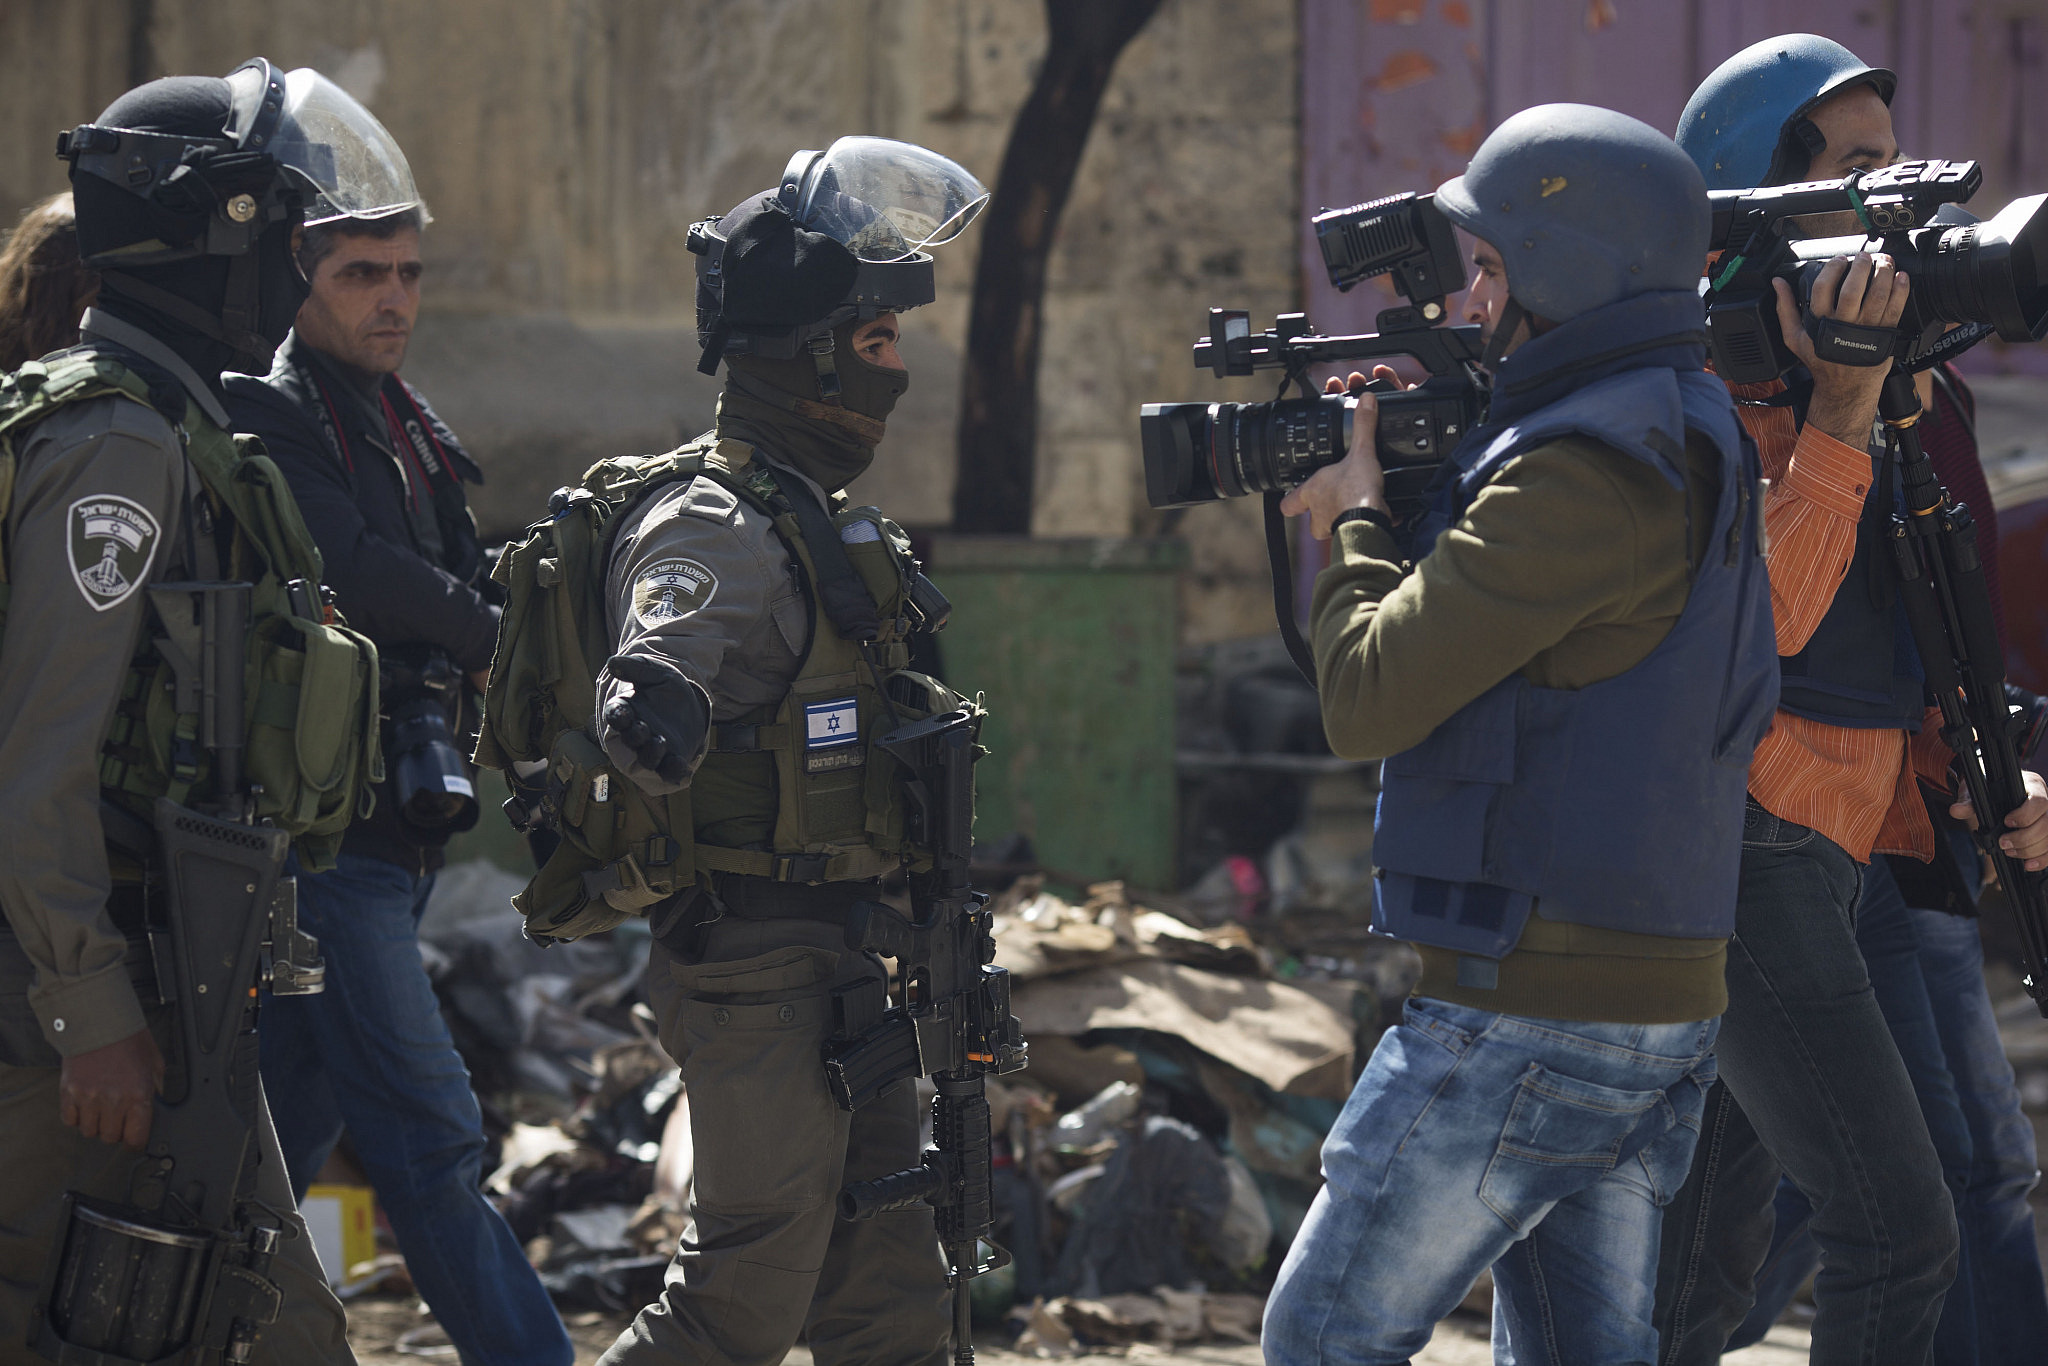 An Israeli border policeman orders a Palestinian journalist to leave the area during a protest against the closure of Shuhada Street to Palestinians, in the West Bank city of Hebron, February 21, 2014. (Oren Ziv/Activestills)